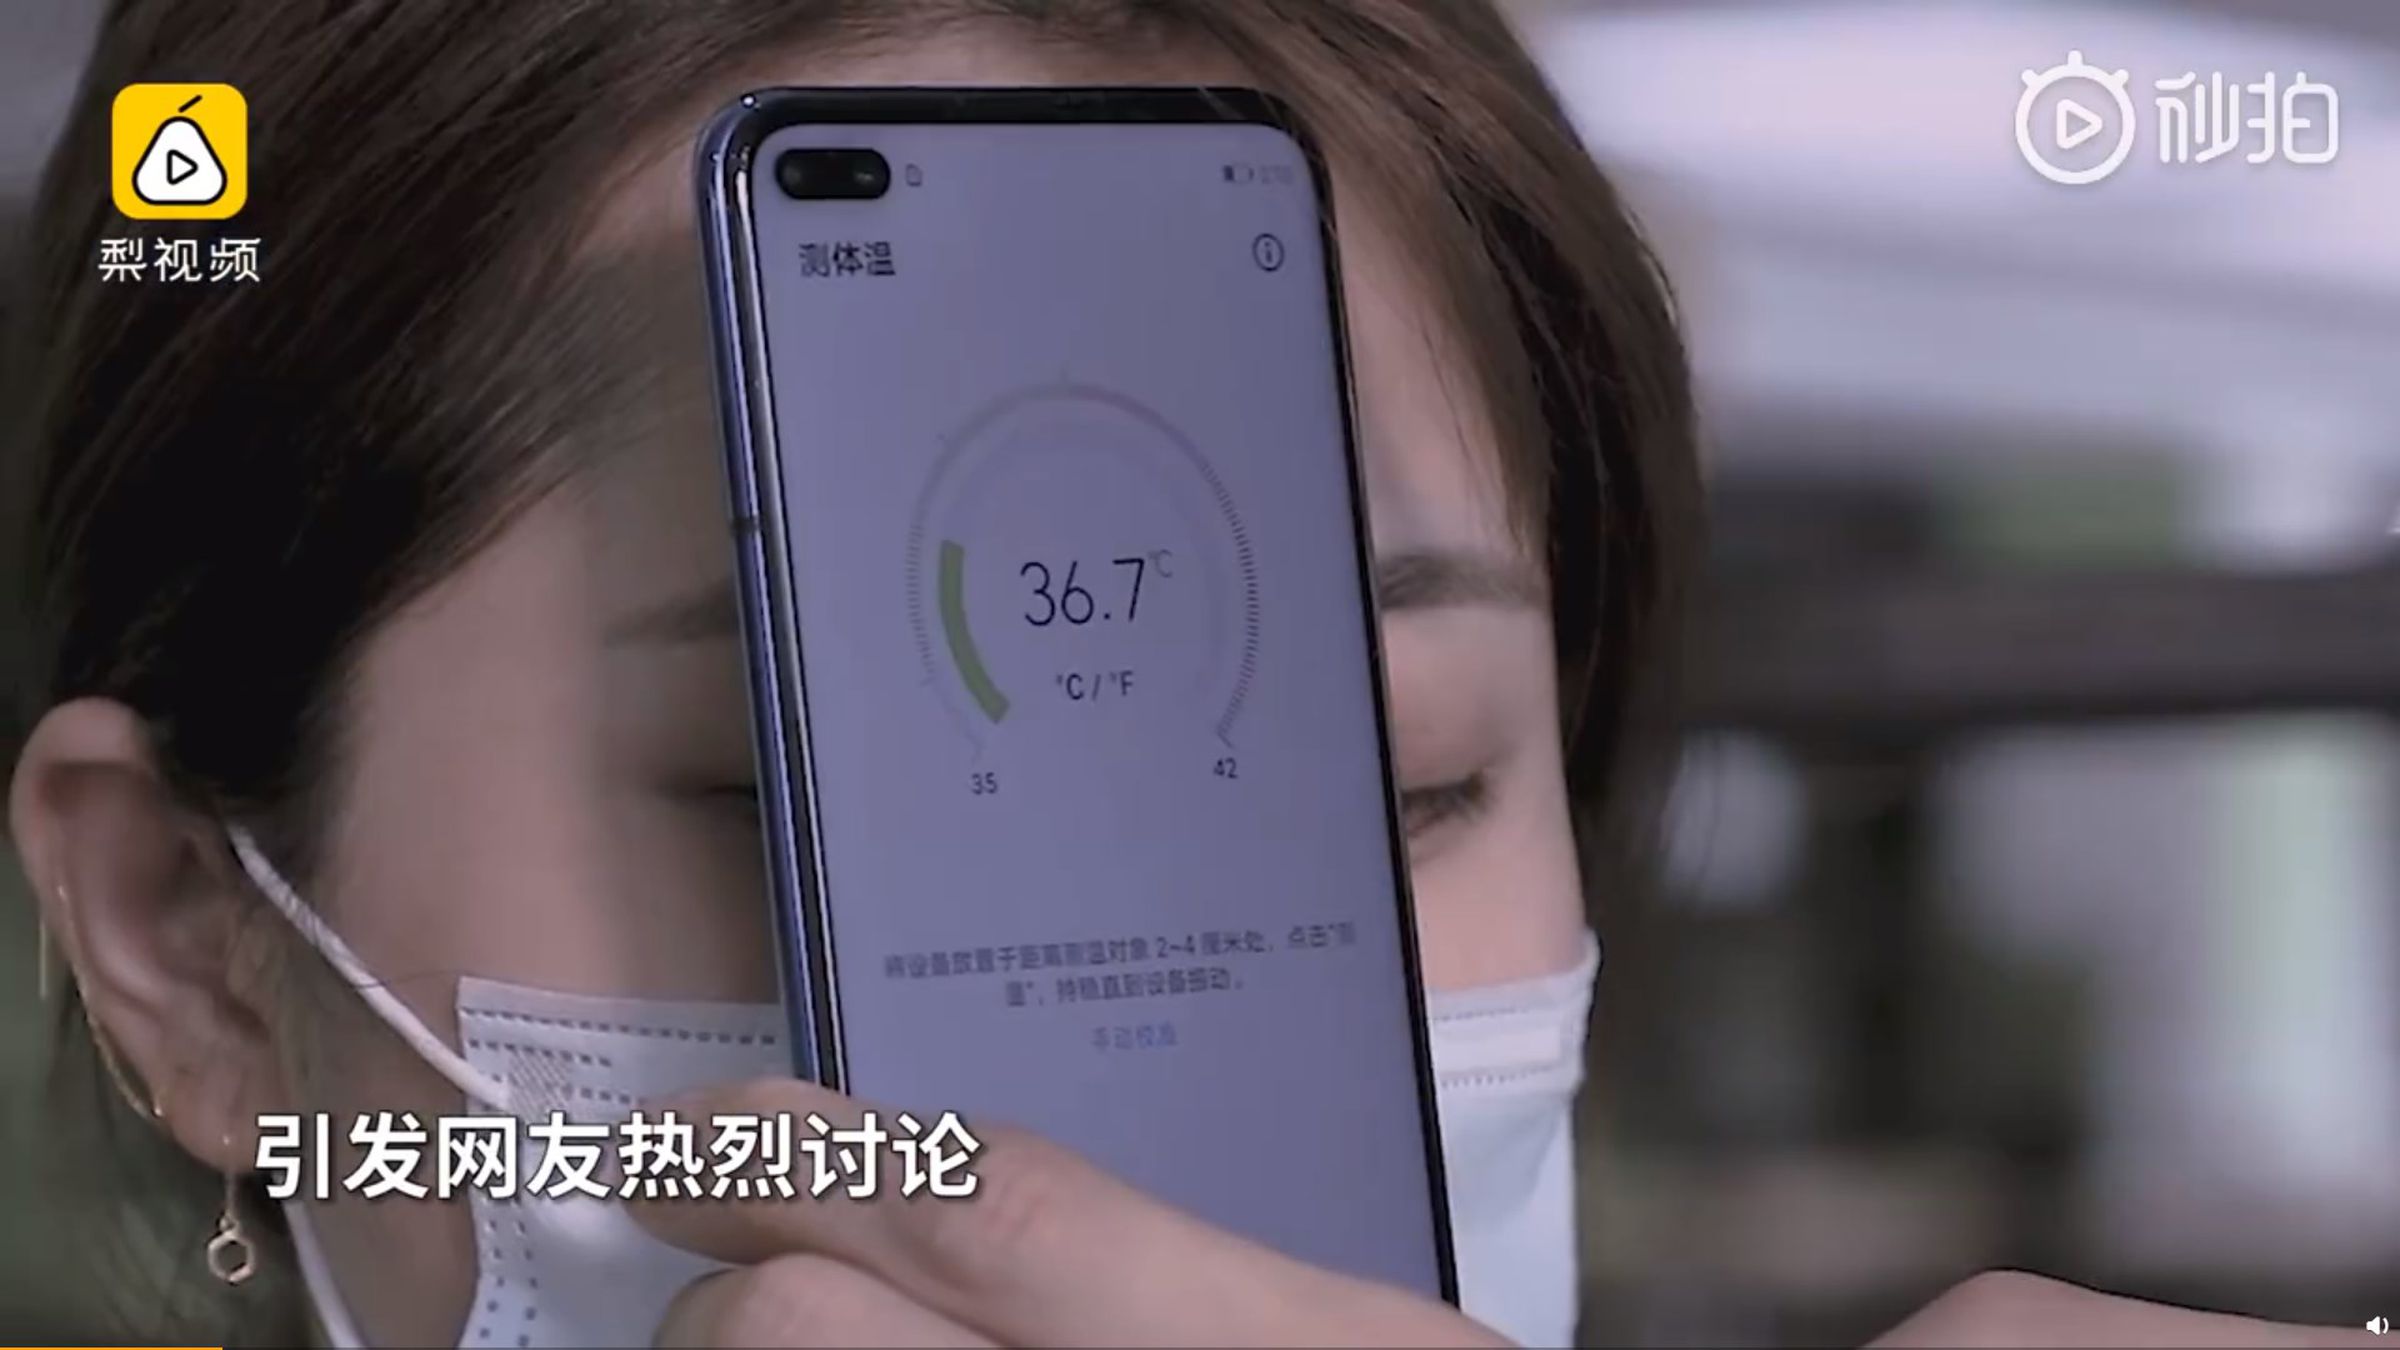 A video posted on the company’s Weibo account shows the temperature sensor in action.